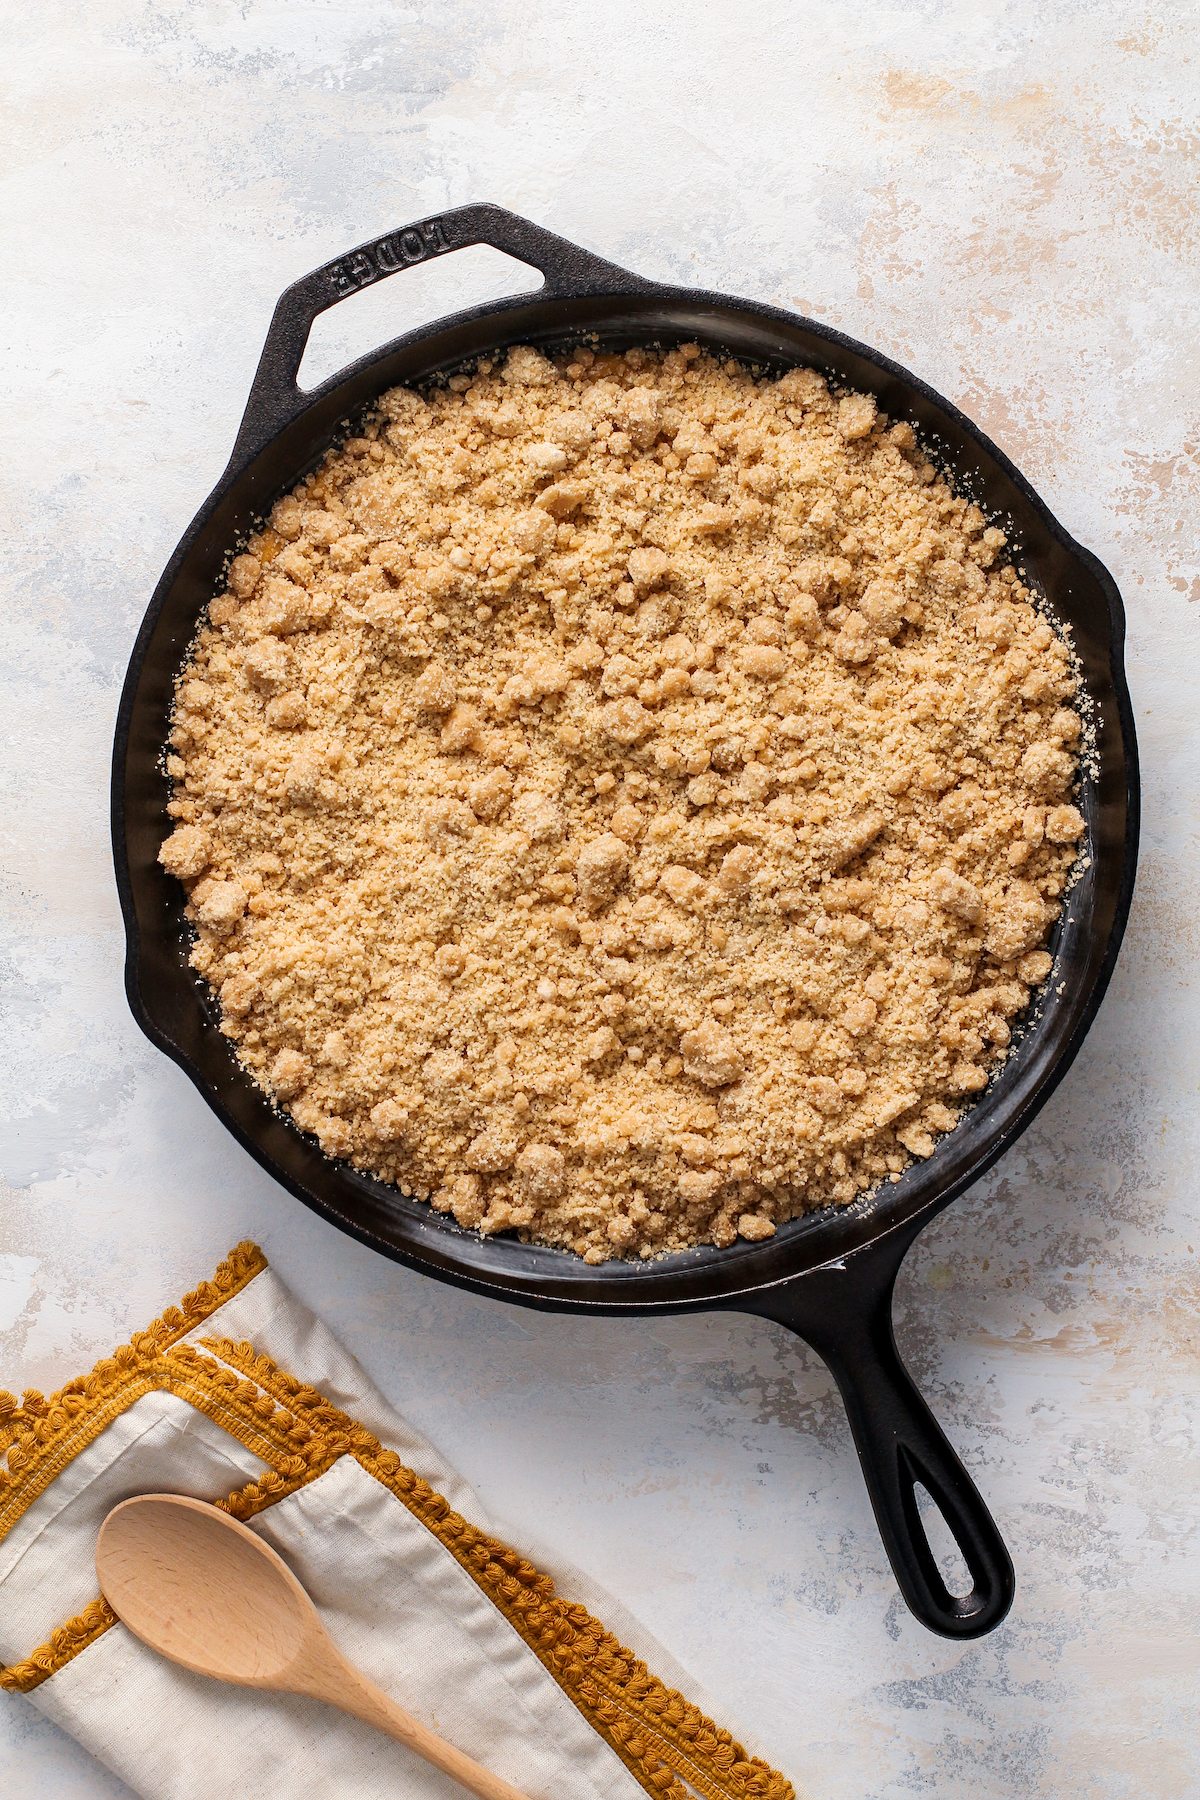 Crumble topping on top of sweet potato filling in a cast iron skillet.